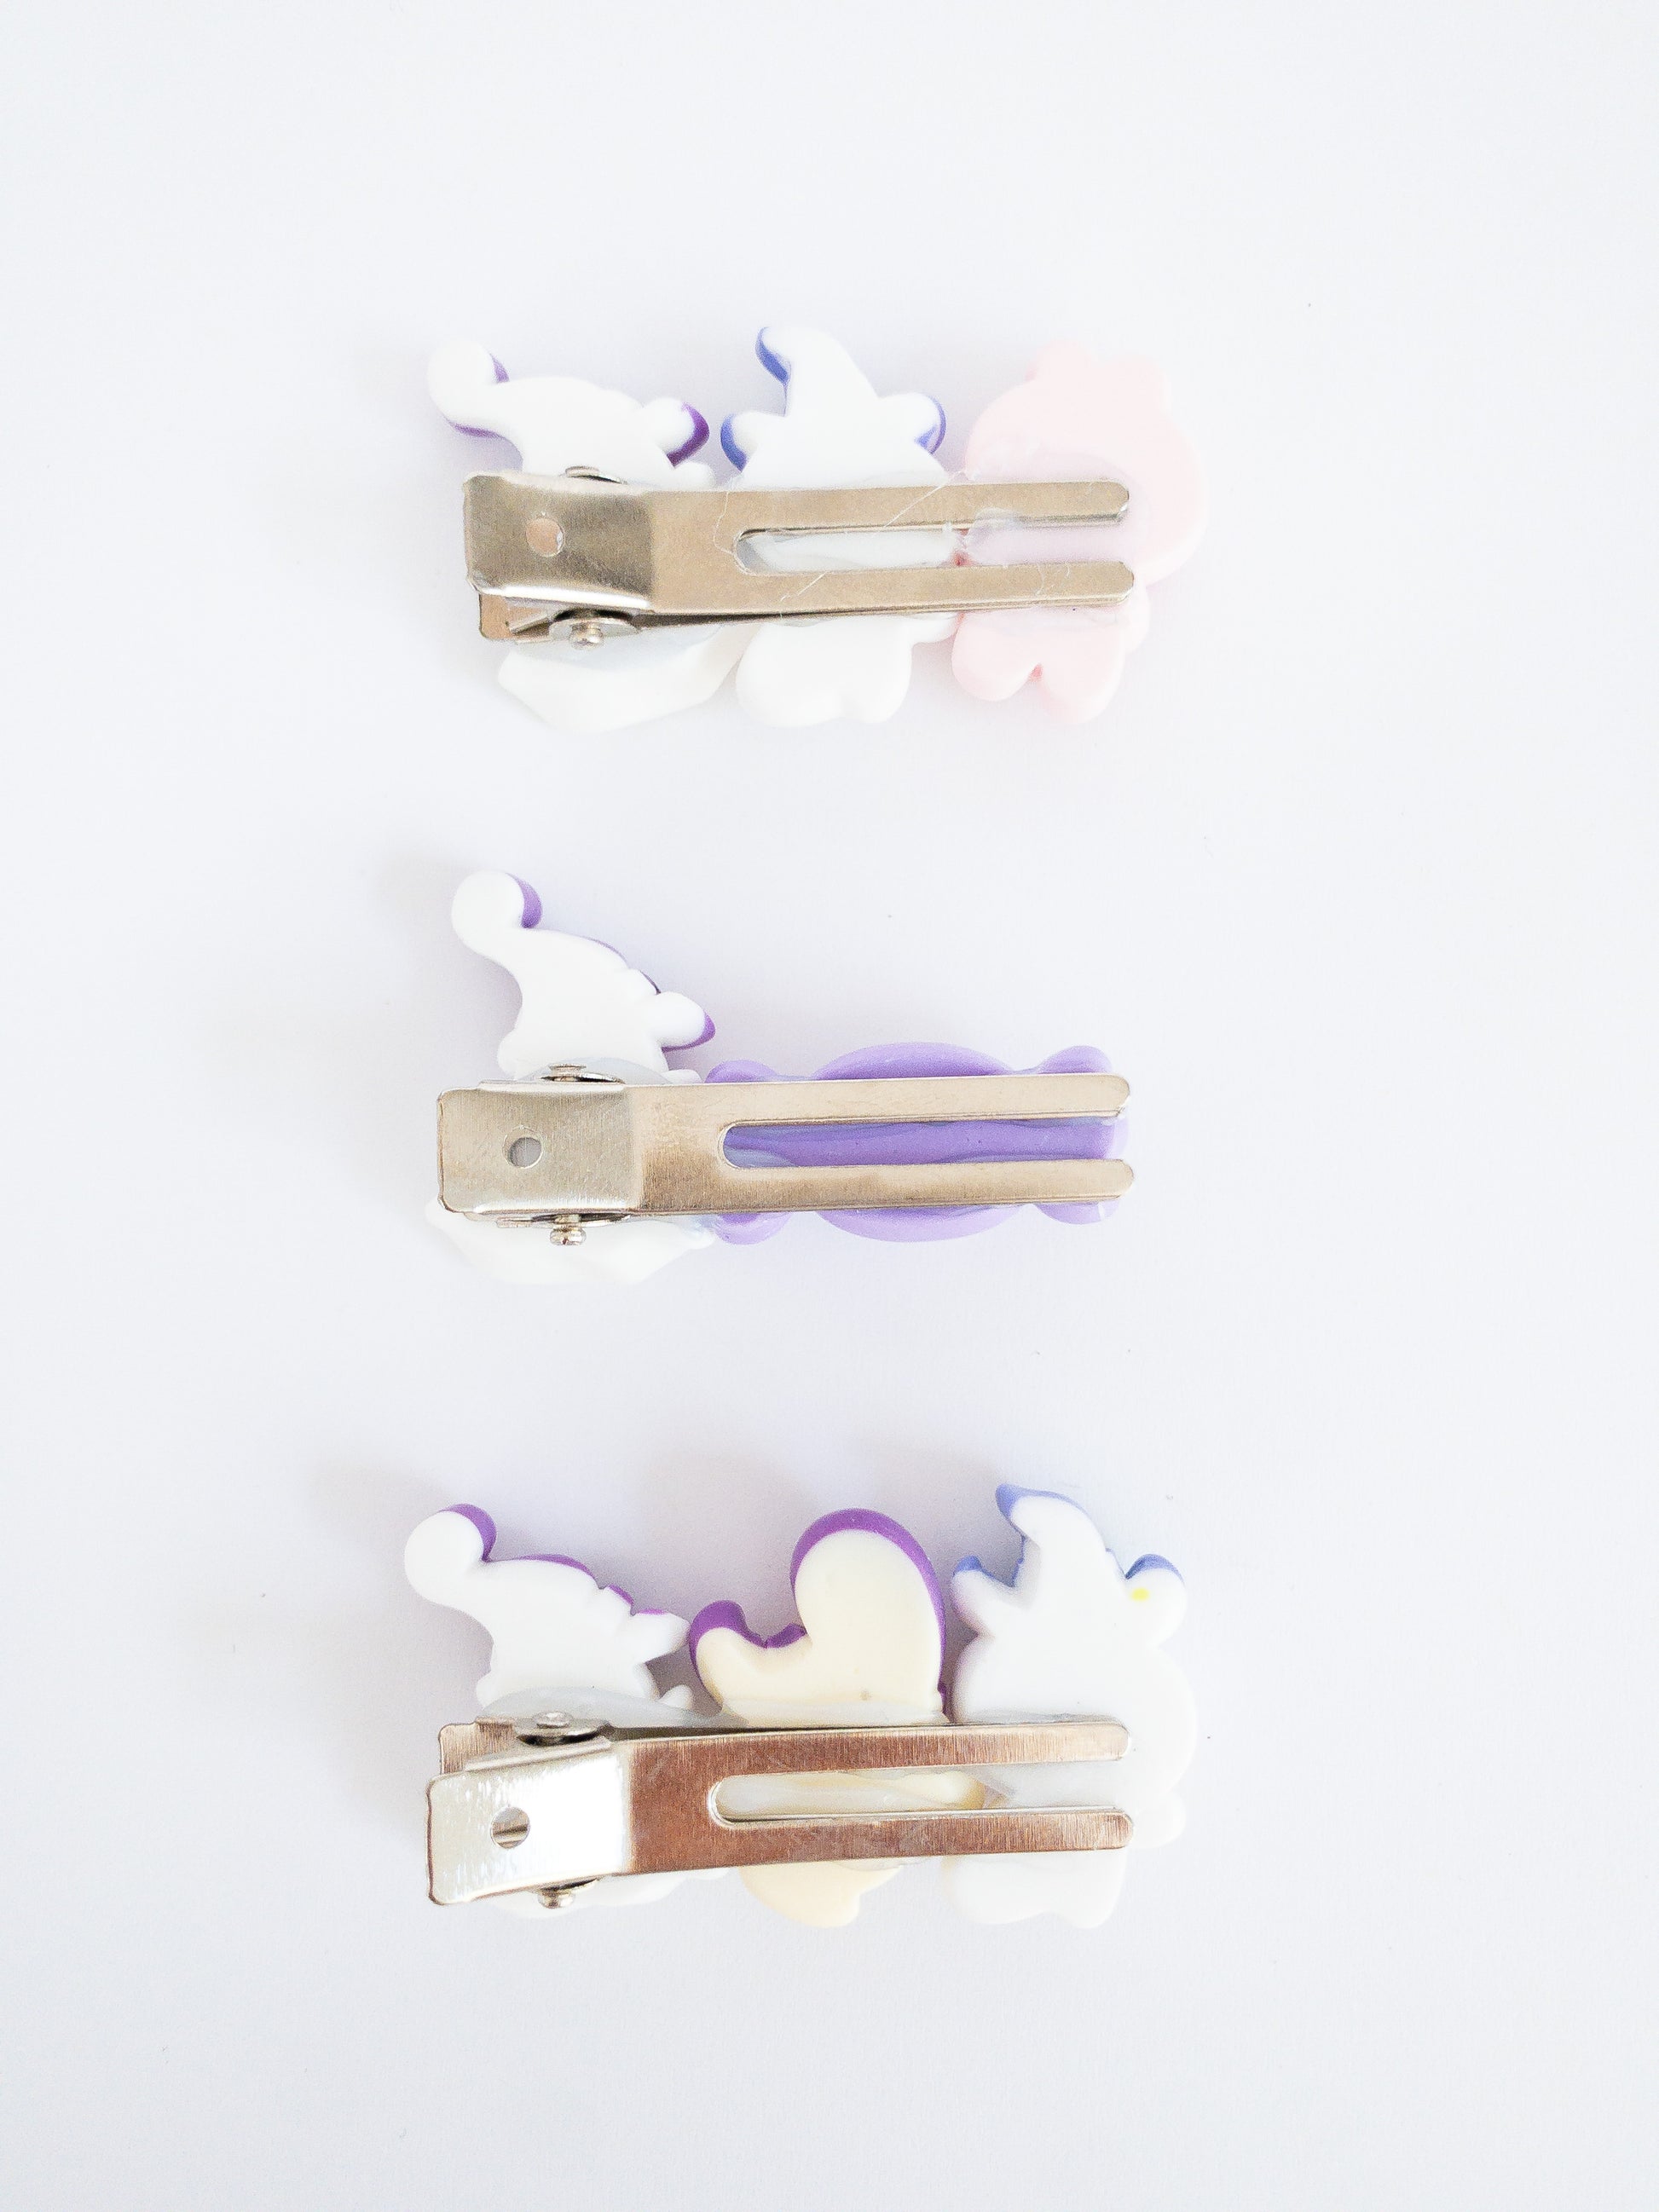 A rabbit, ghost witch, and skeleton go trick or treating in this fun, festive hair clip set. Each set comes with 3 hair clips with a variety of characters each on an alligator clip.